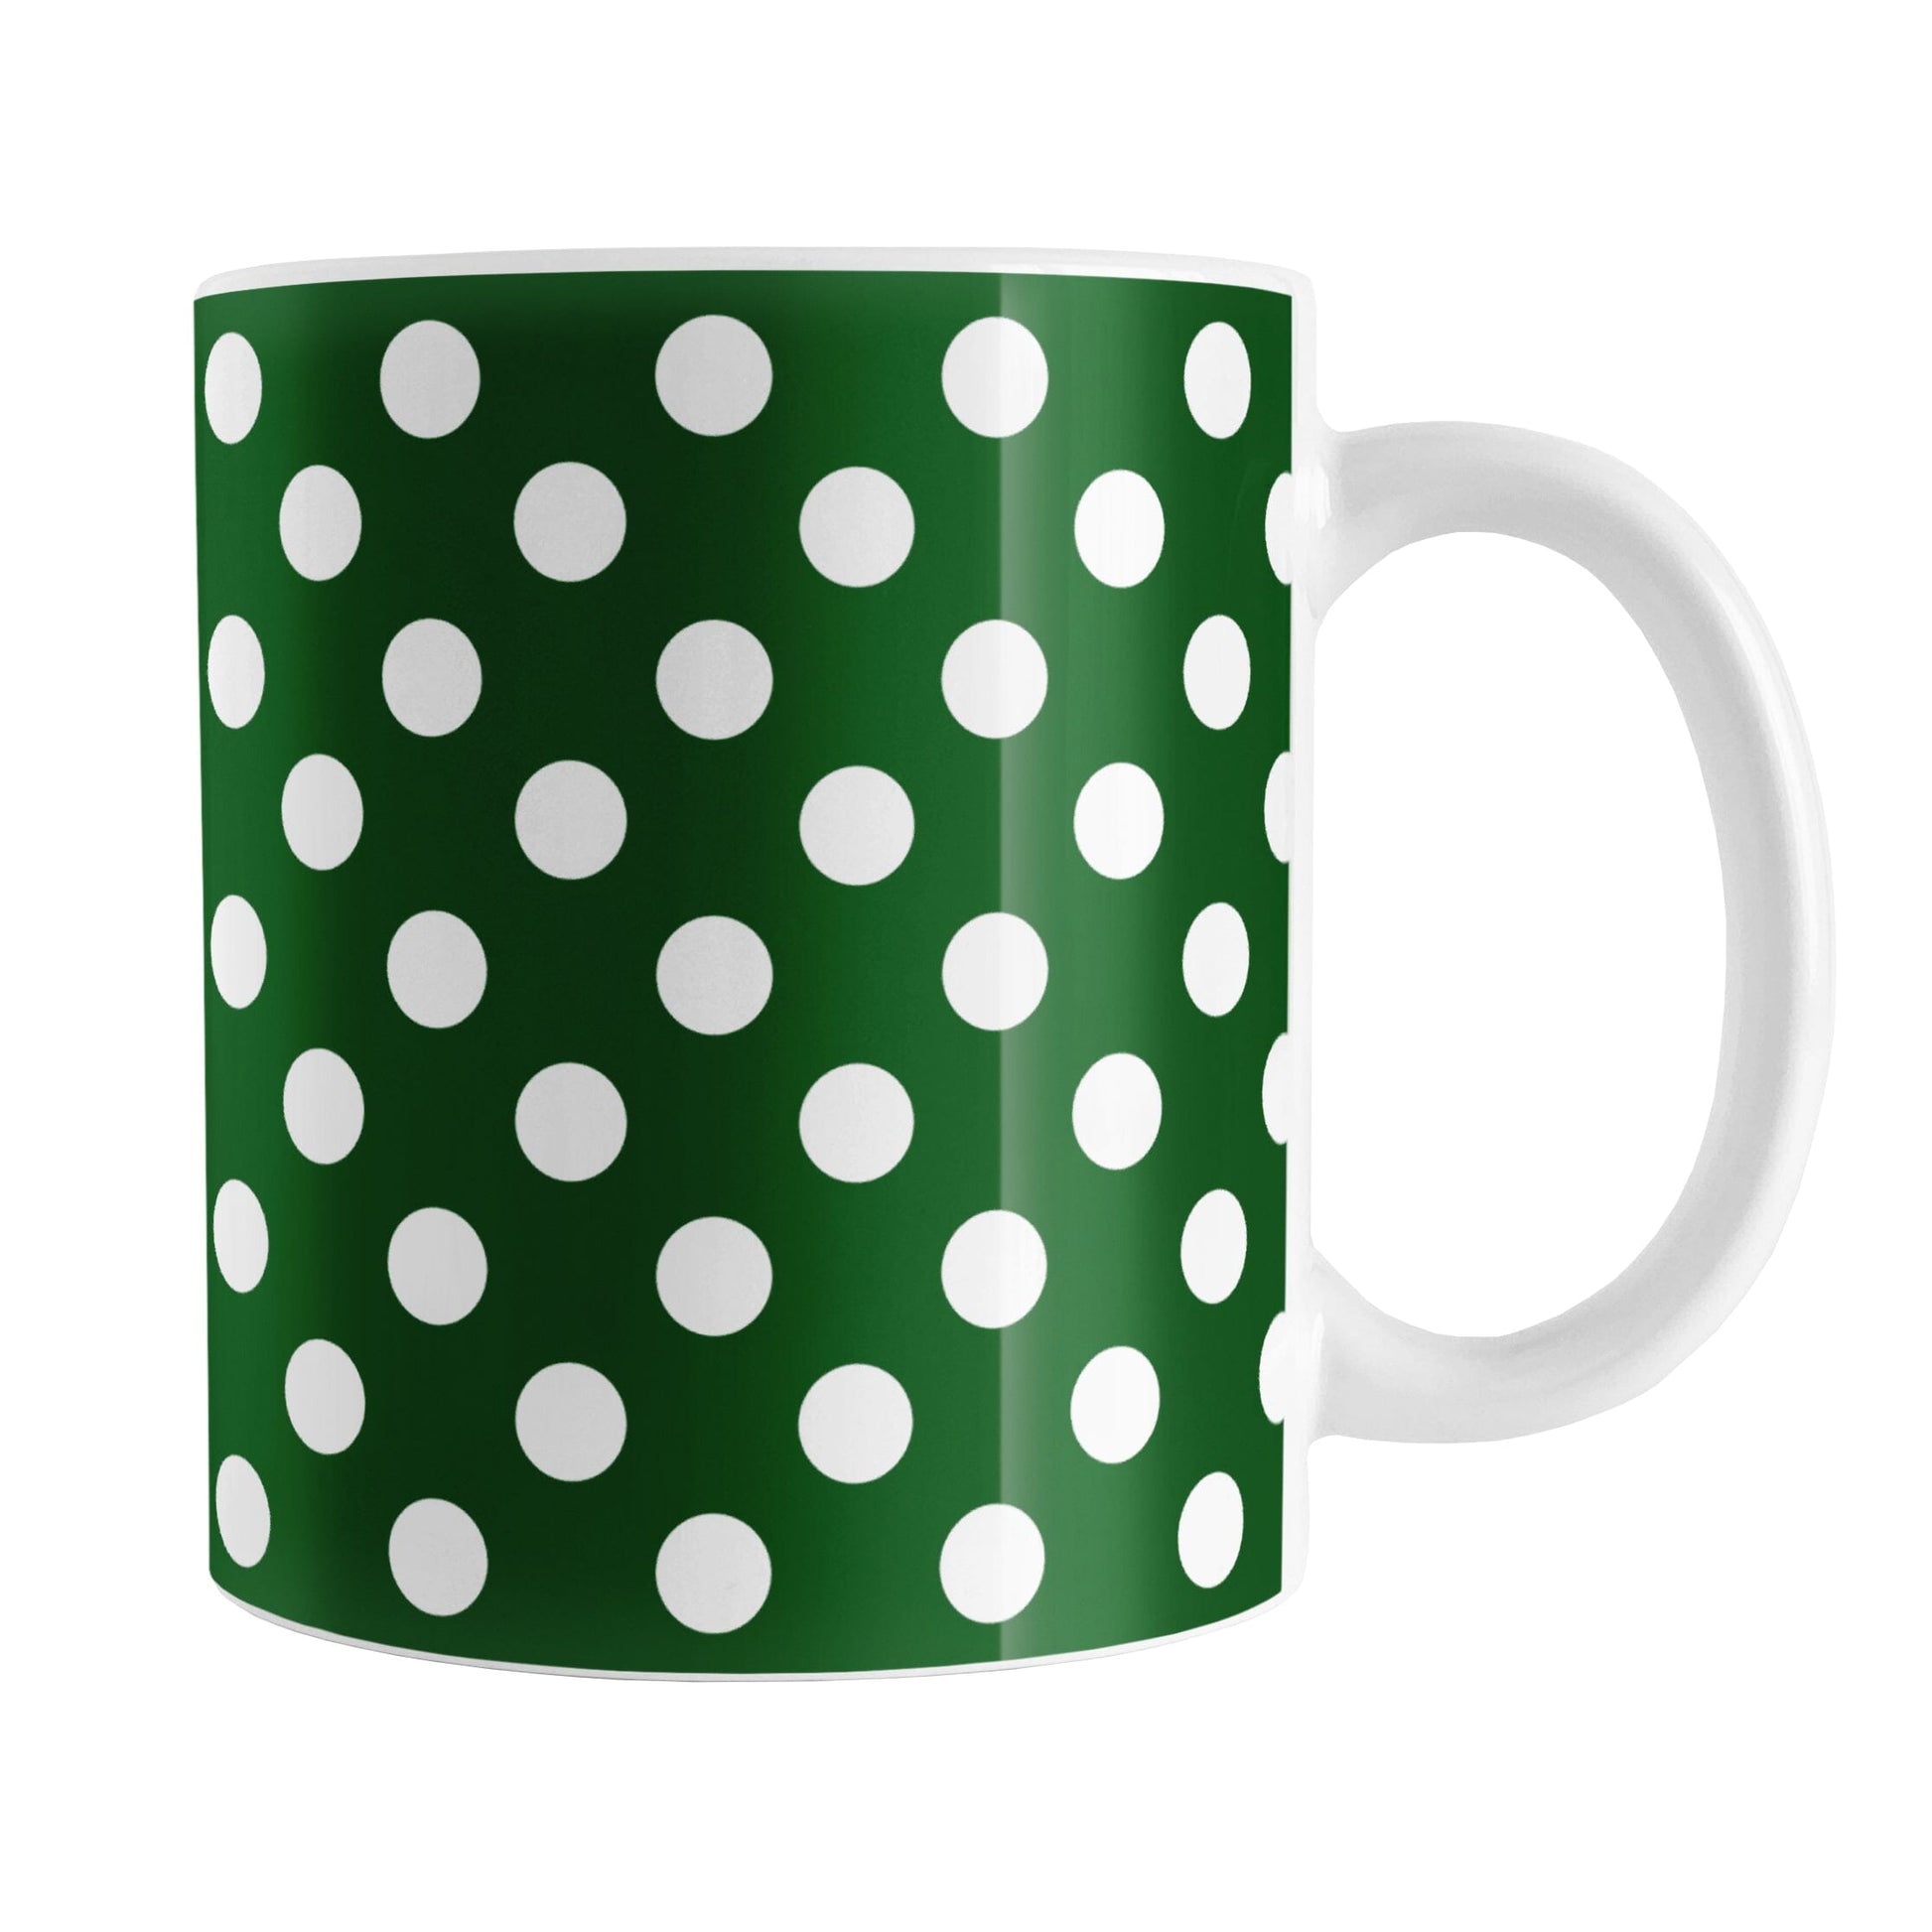 Dark Green Polka Dot Mug (11oz) at Amy's Coffee Mugs. A ceramic coffee mug designed with a dark green polka dot pattern with white dots over a dark green background color. This polka dotted pattern wraps around the mug to the handle.